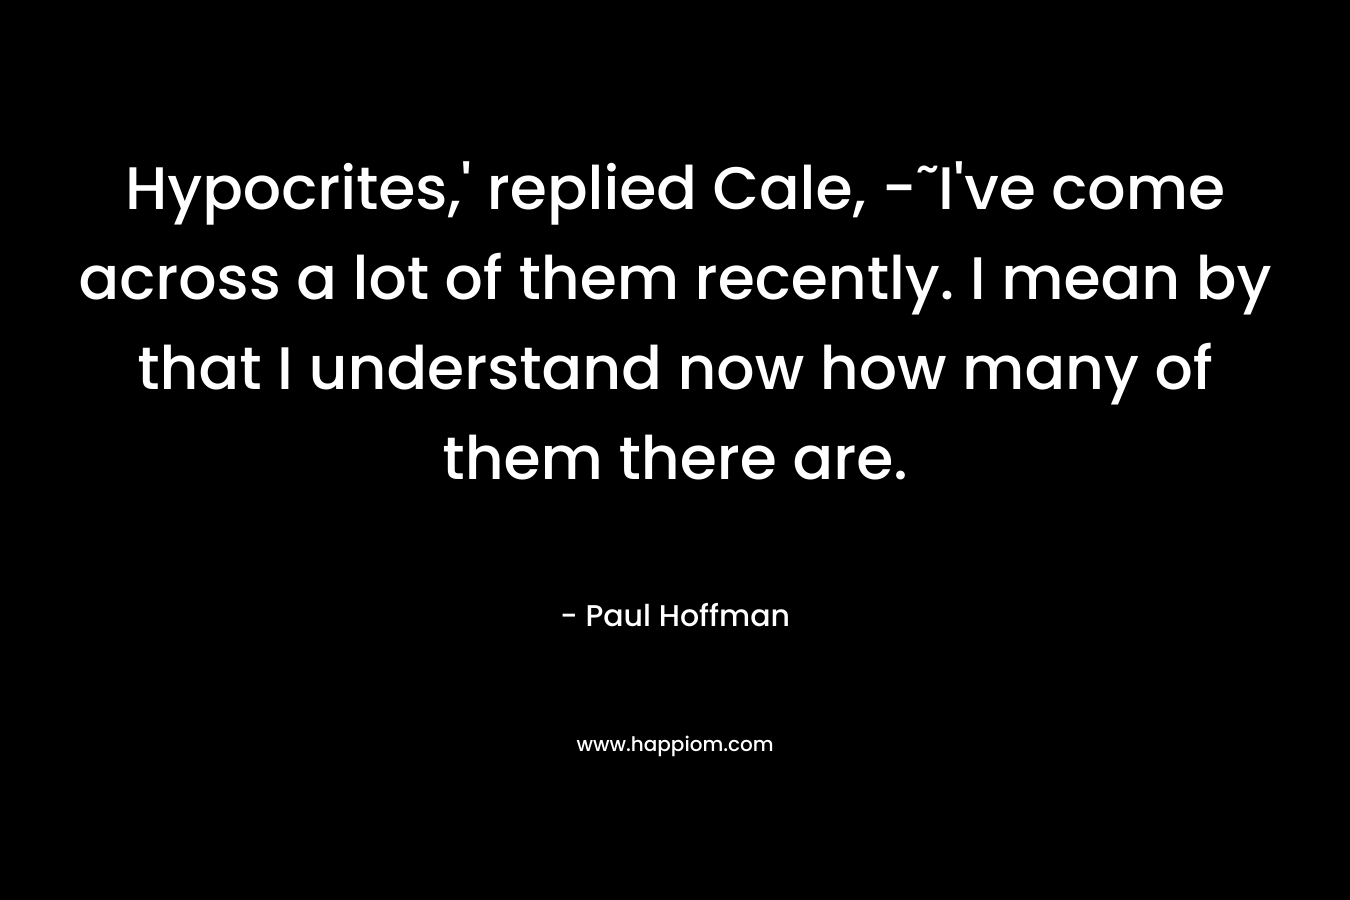 Hypocrites,' replied Cale, -˜I've come across a lot of them recently. I mean by that I understand now how many of them there are.